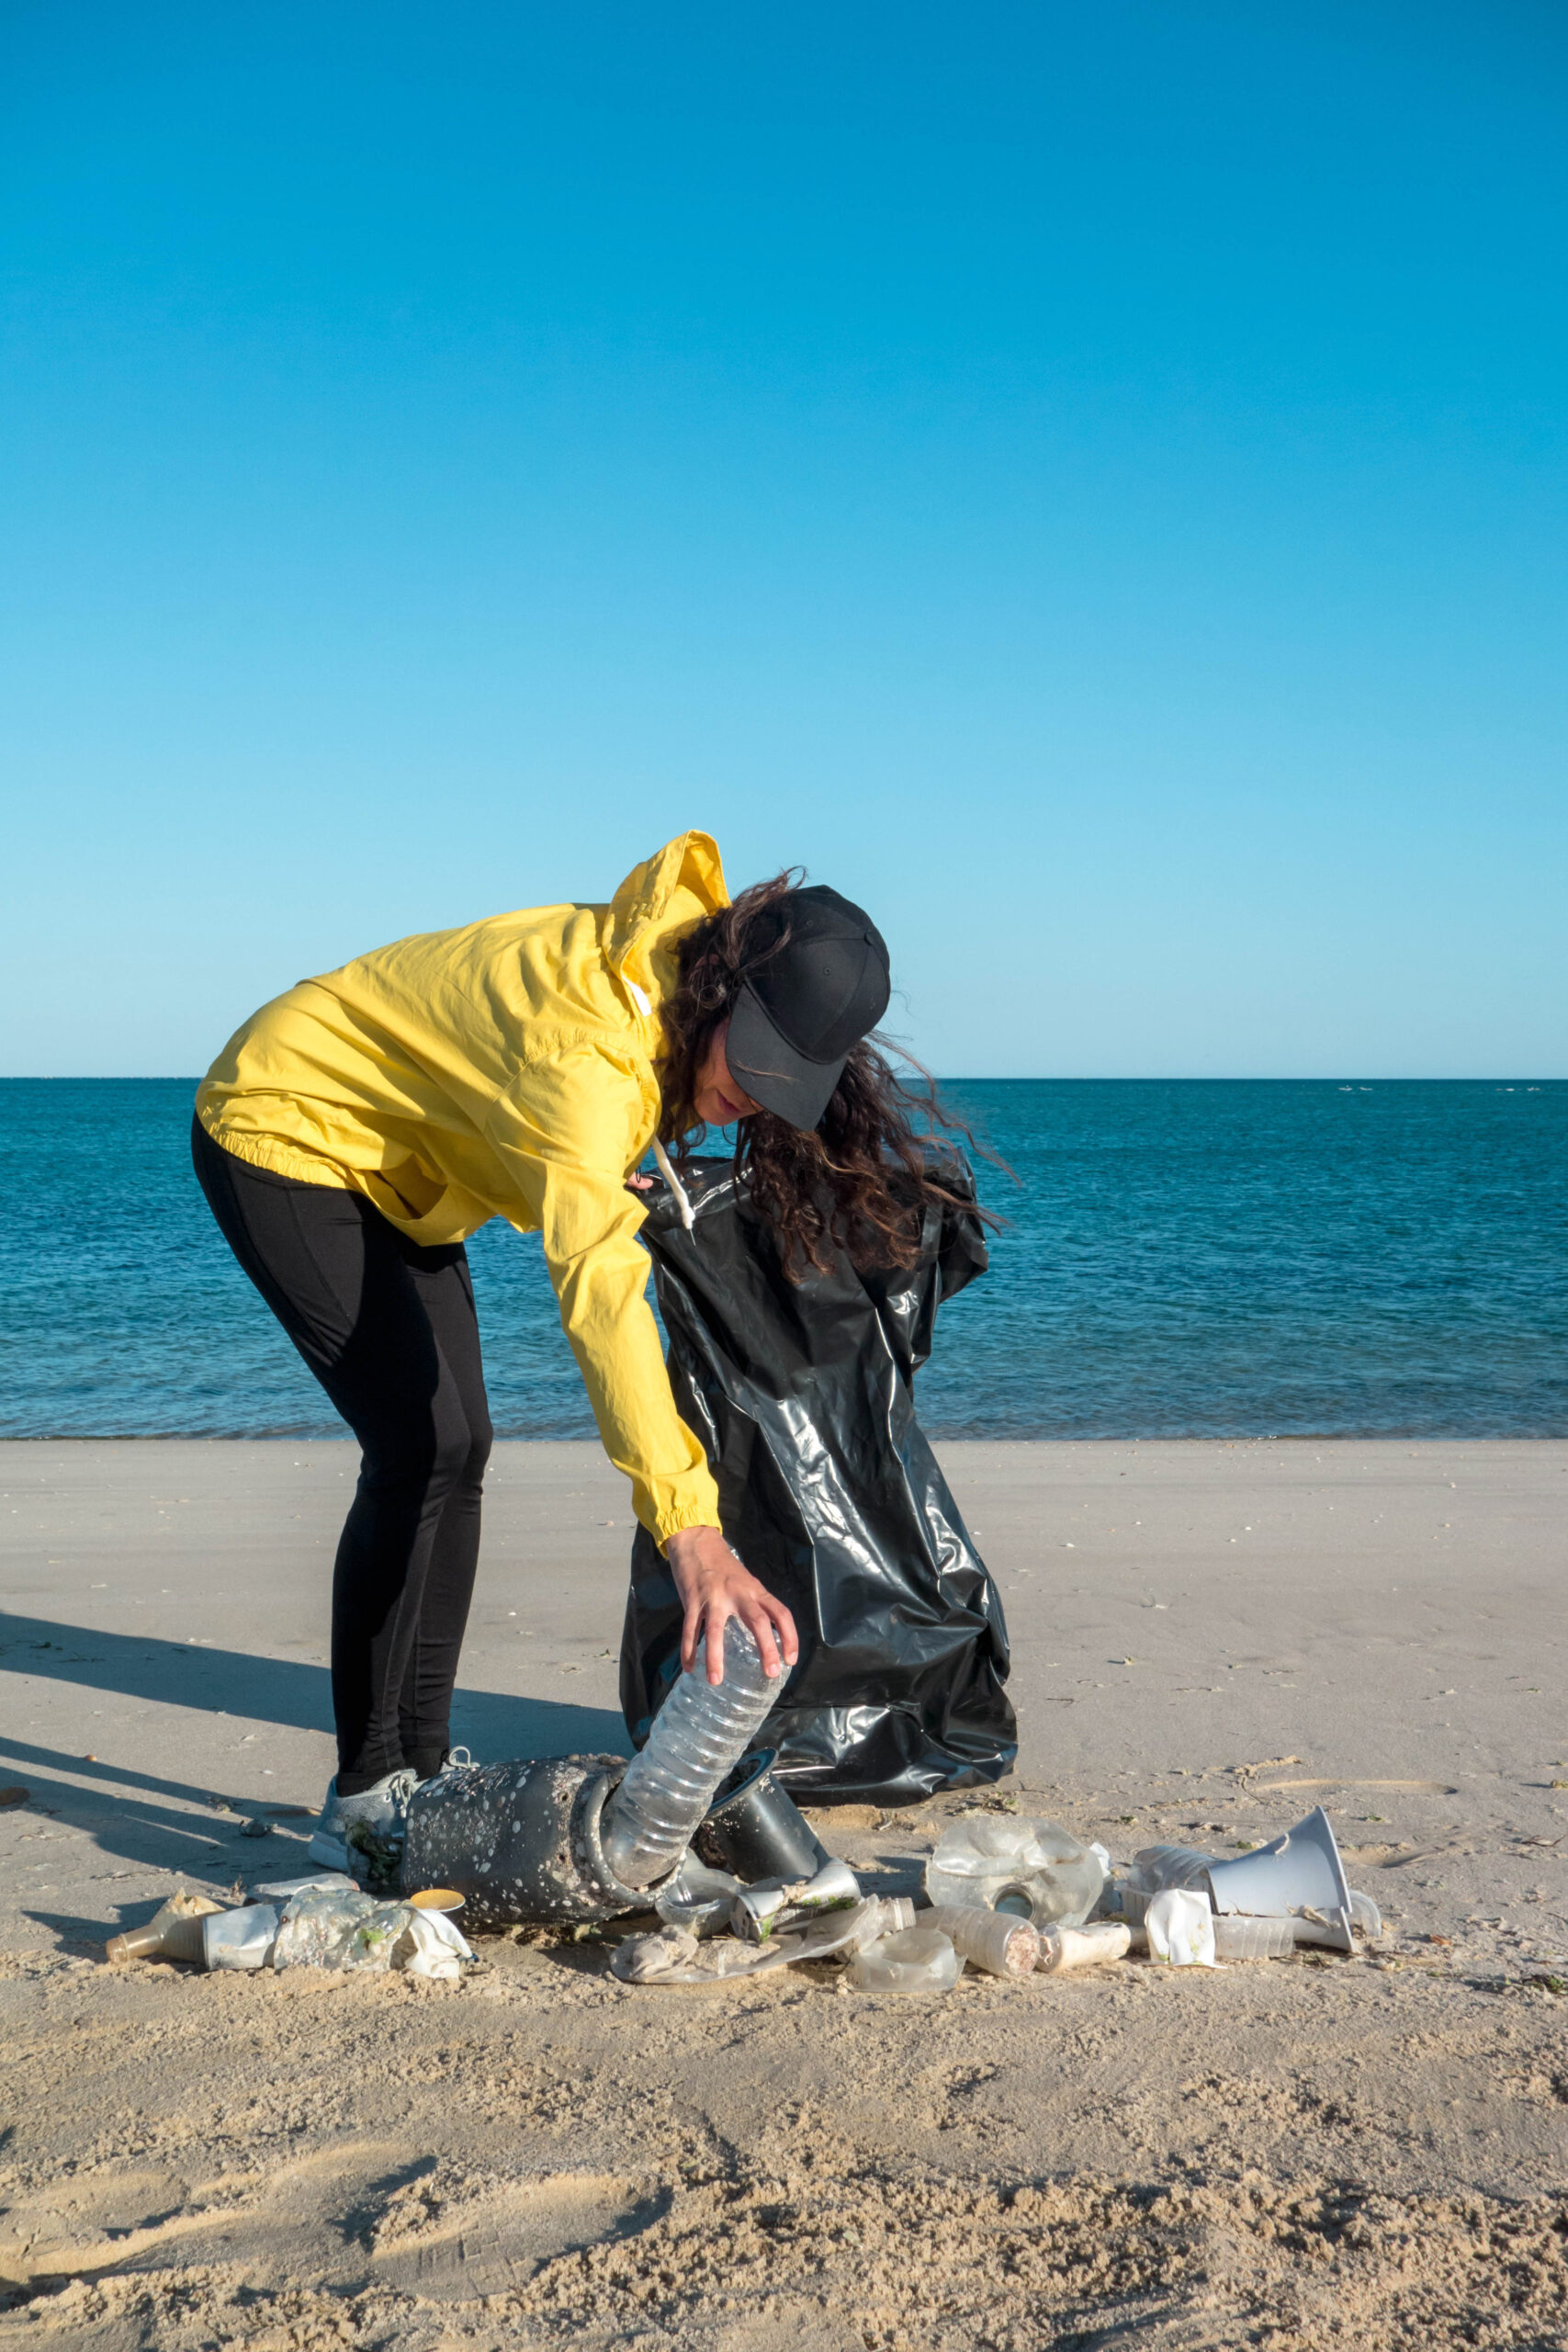 Adult in yellow jacket picking up trash on the beach